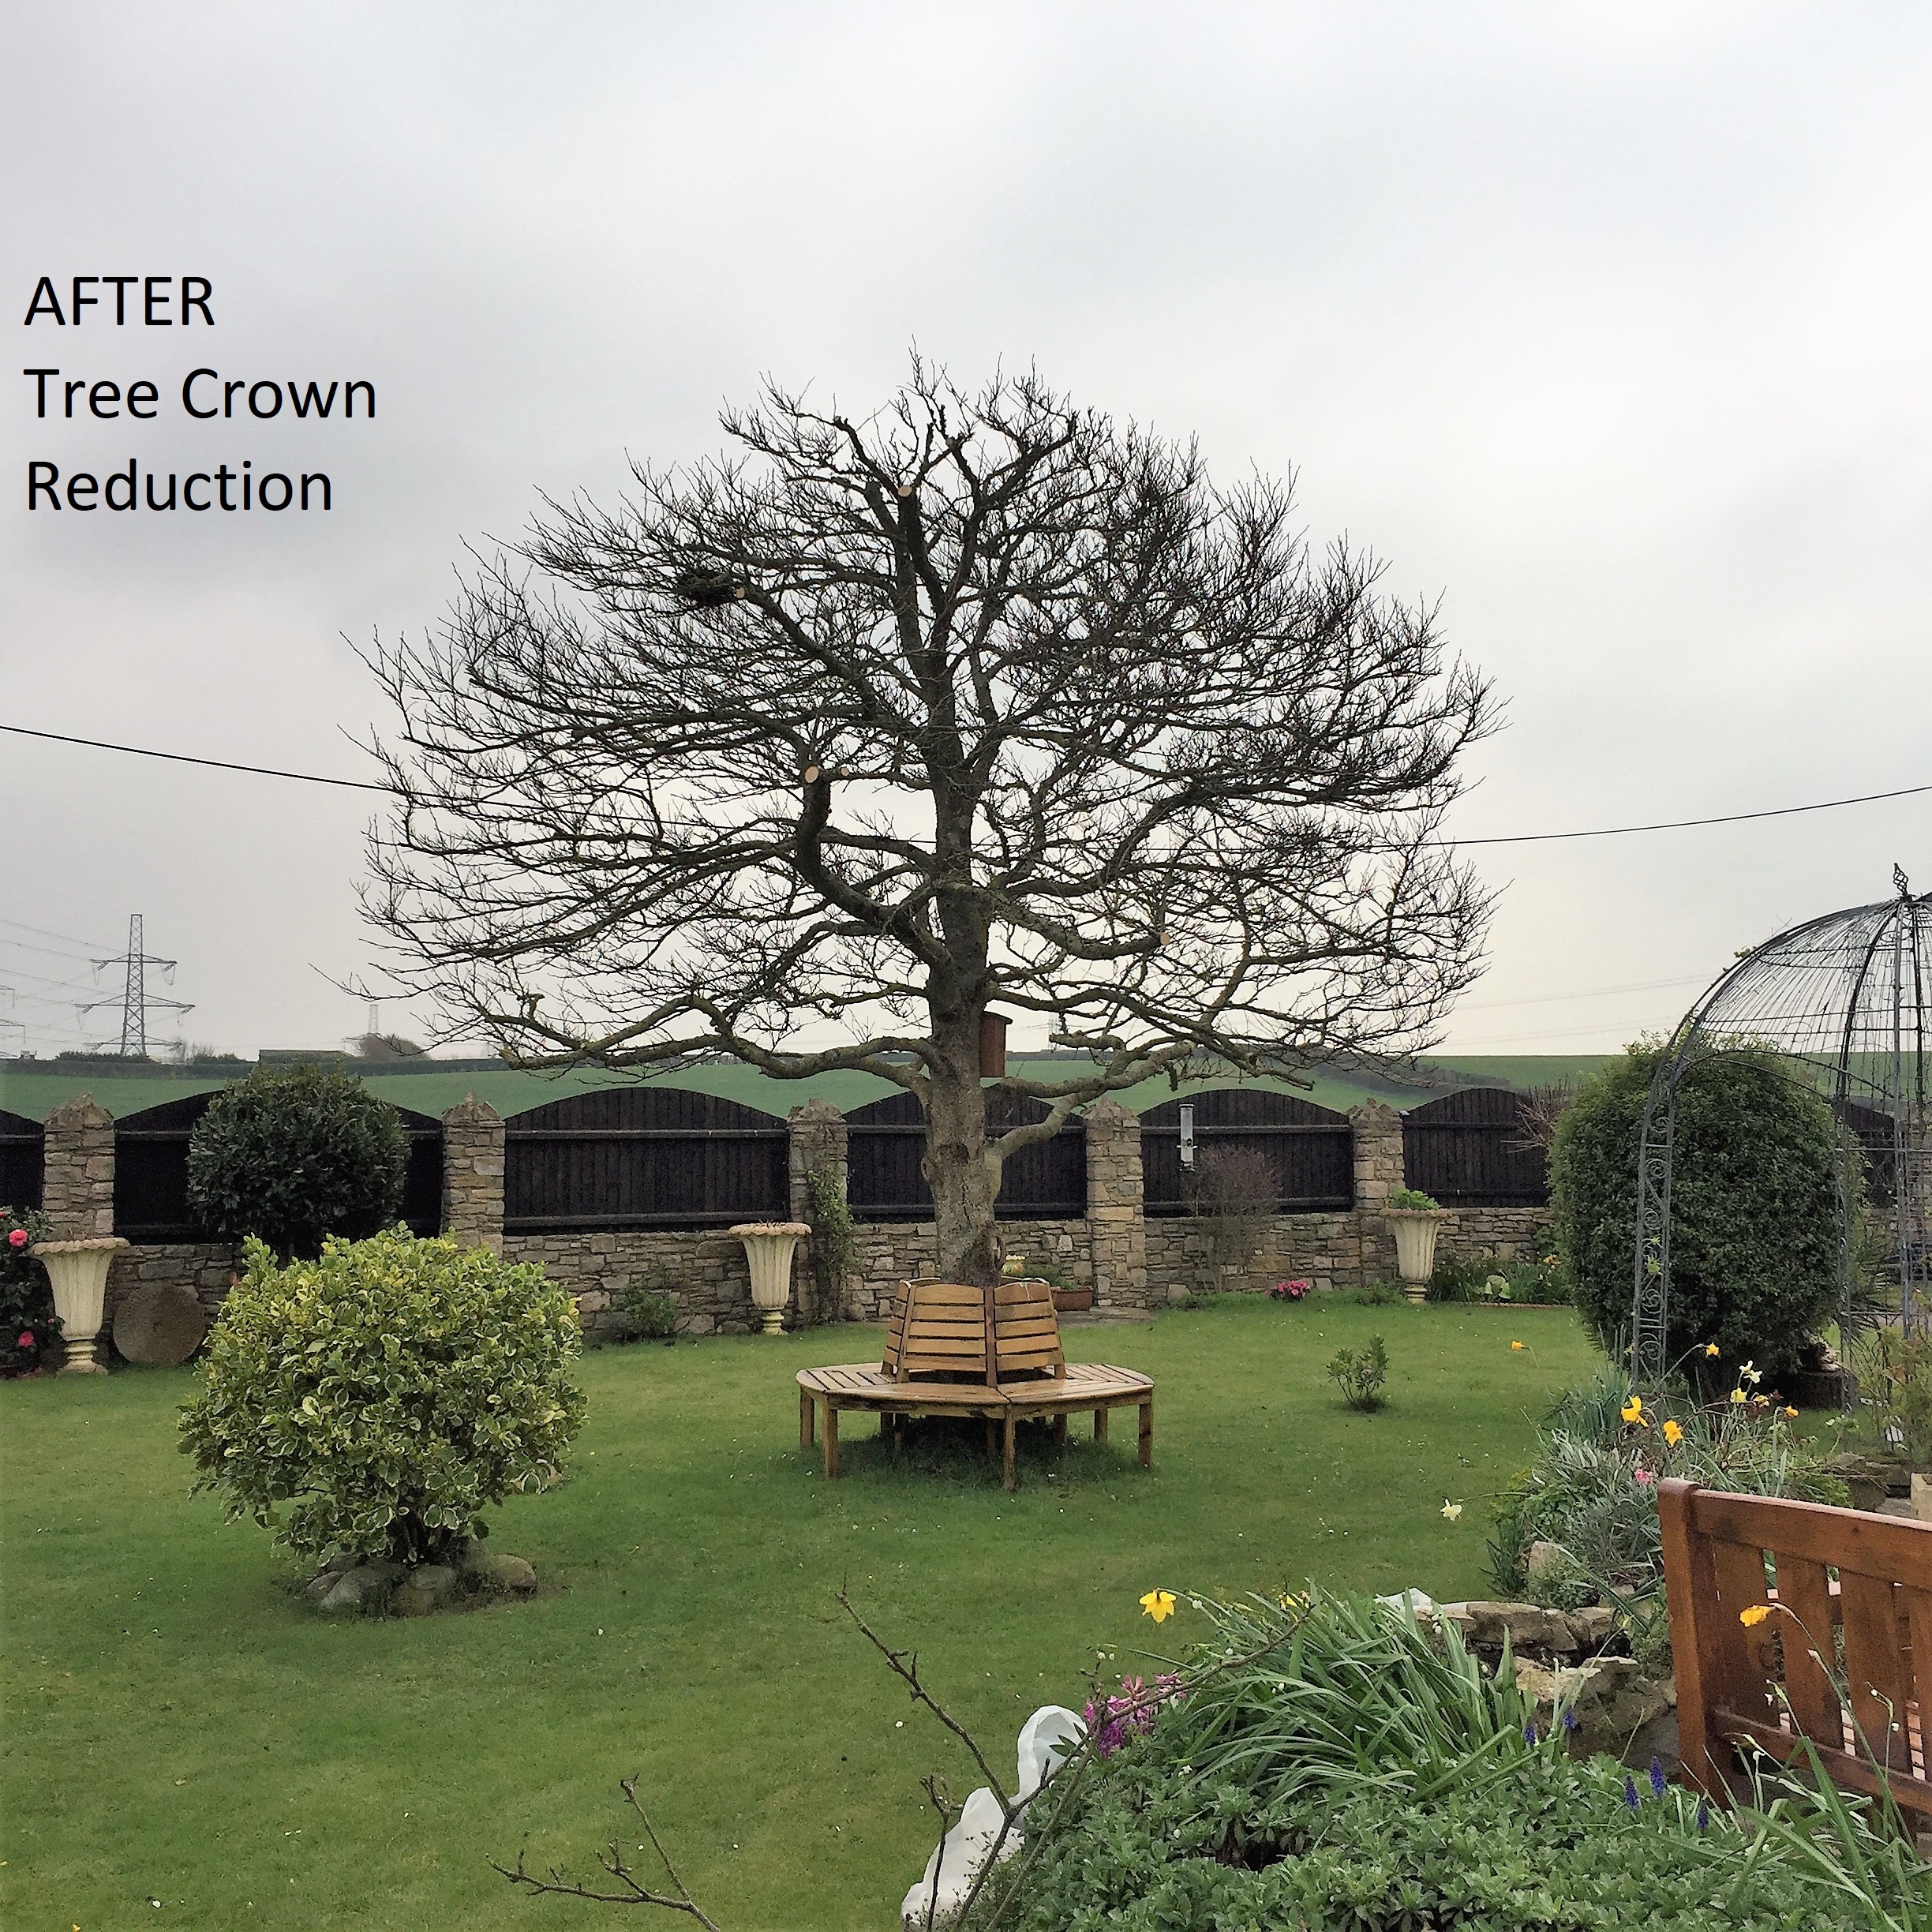 Weymouth tree surgeon. Tree Care - Tree Pruning - Photo: before and after. Weymouth Portland Dorchester.